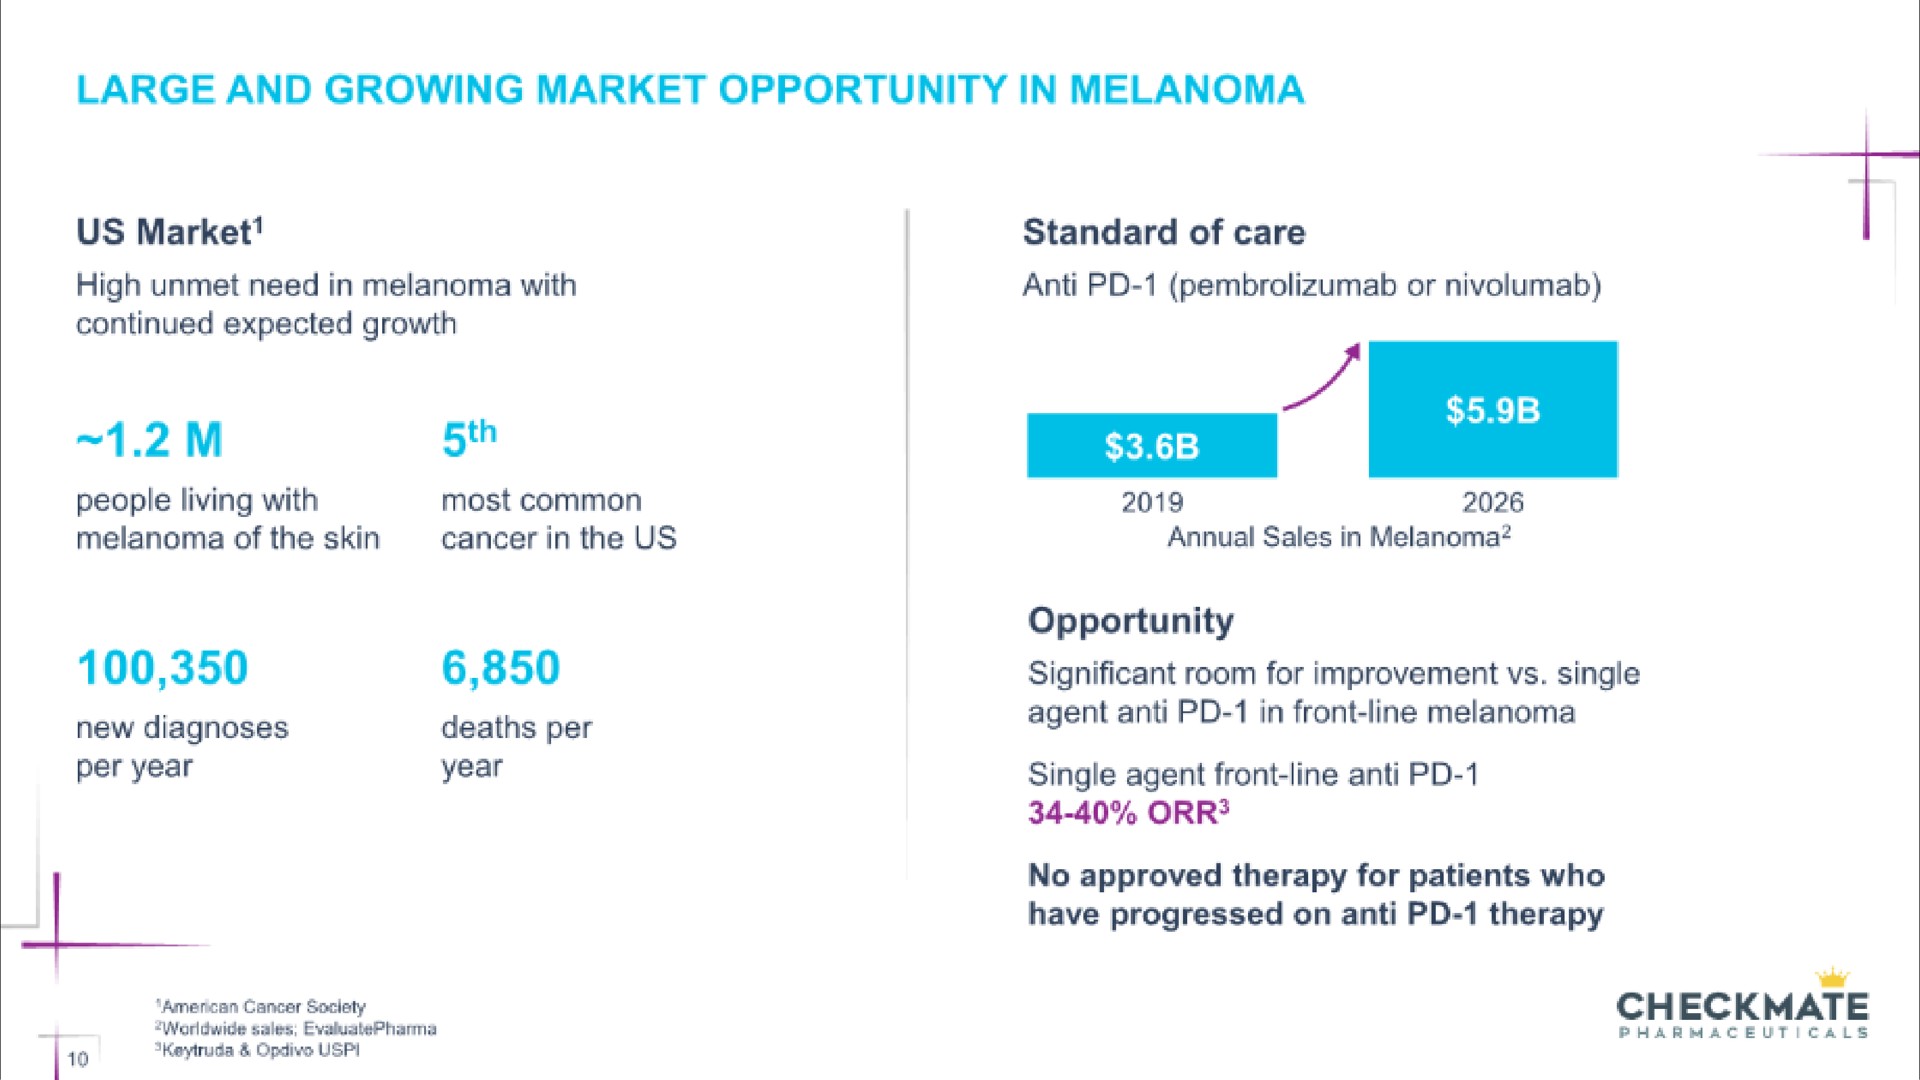 large and growing market opportunity in melanoma | Checkmate Pharmaceuticals